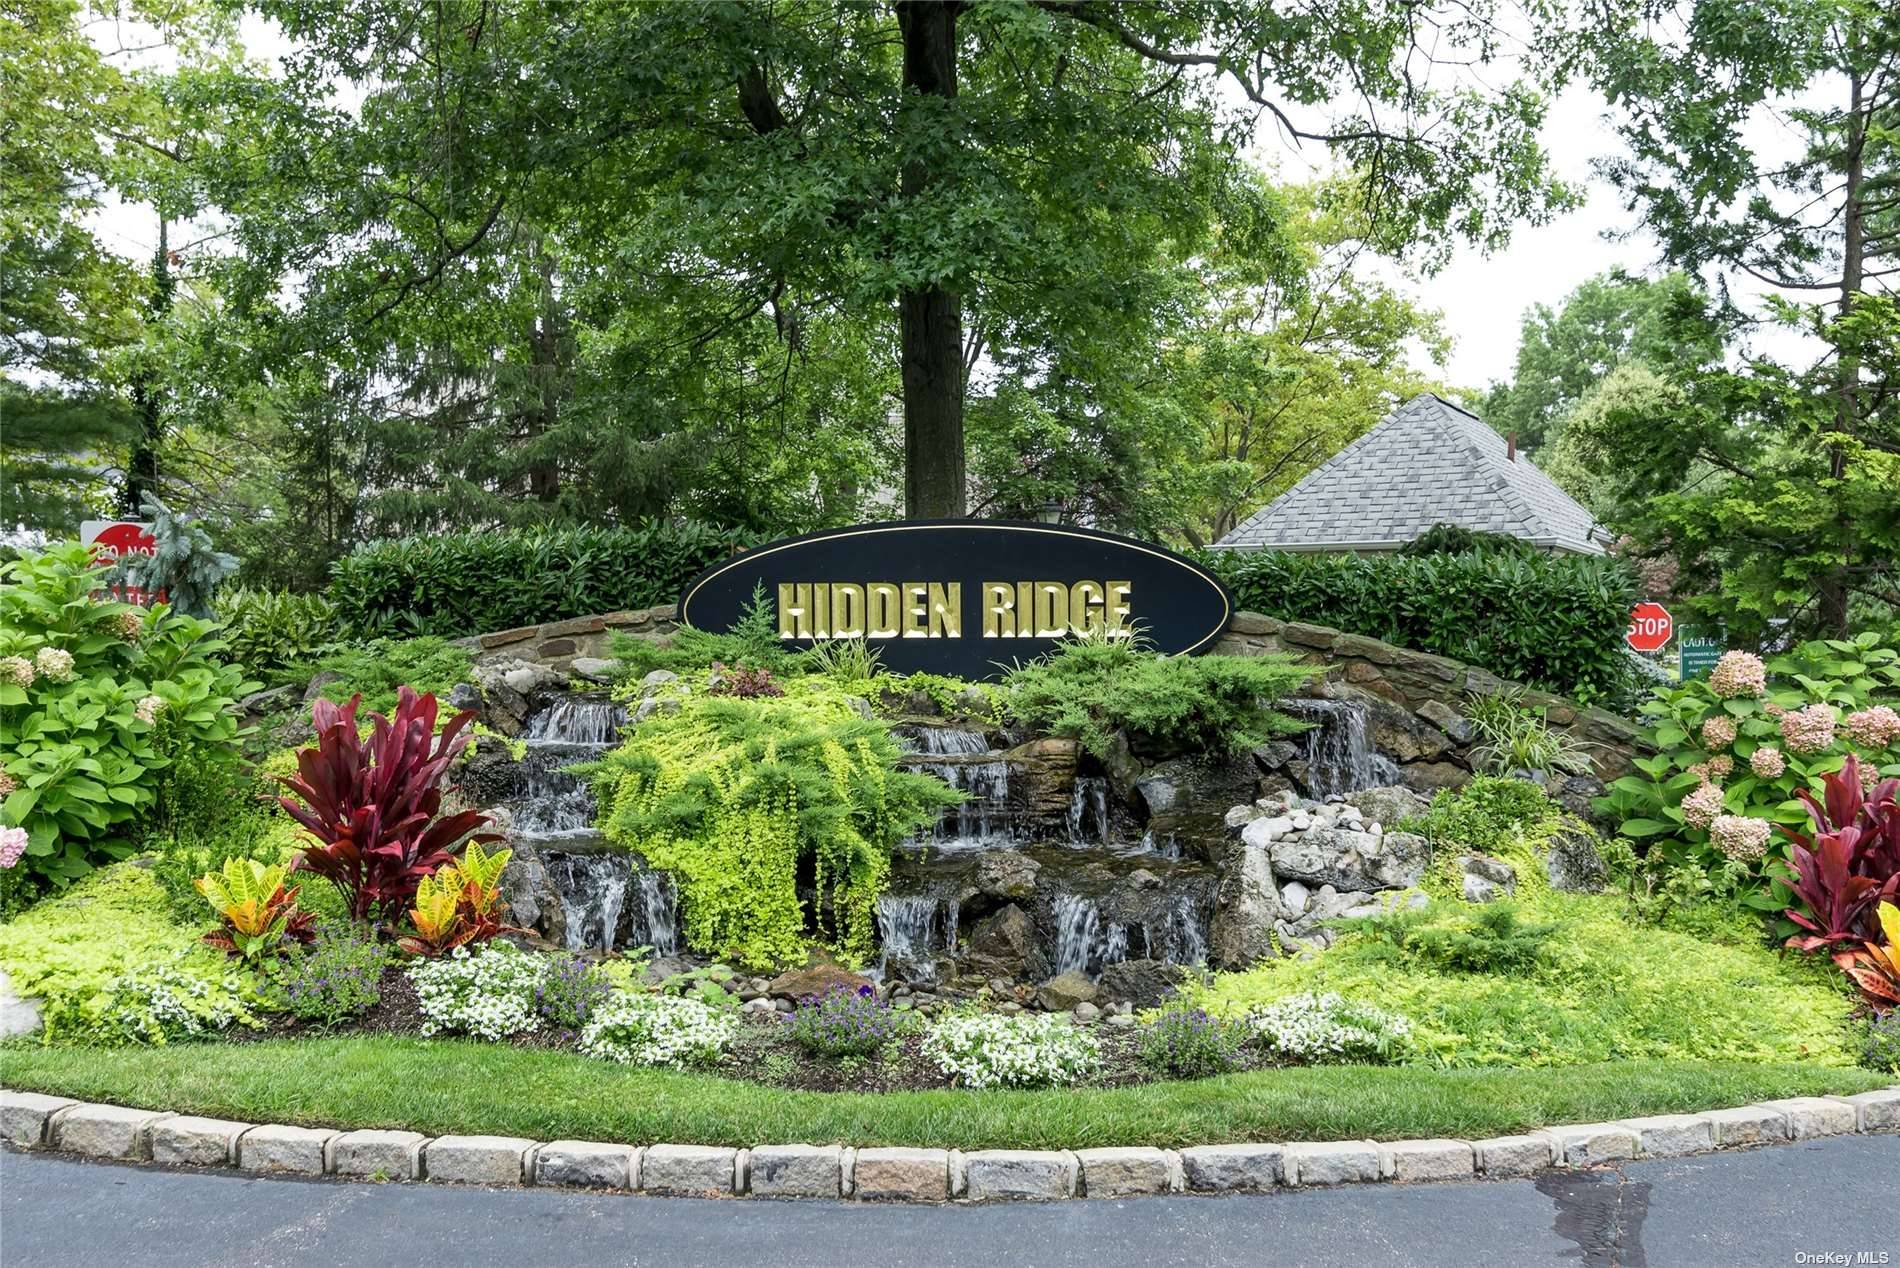 Pristine 3 Bedroom 2. 5 Bath Colonial Style Condo With Full Finished Basement In The Hidden Ridge Syosset Development For Rent.